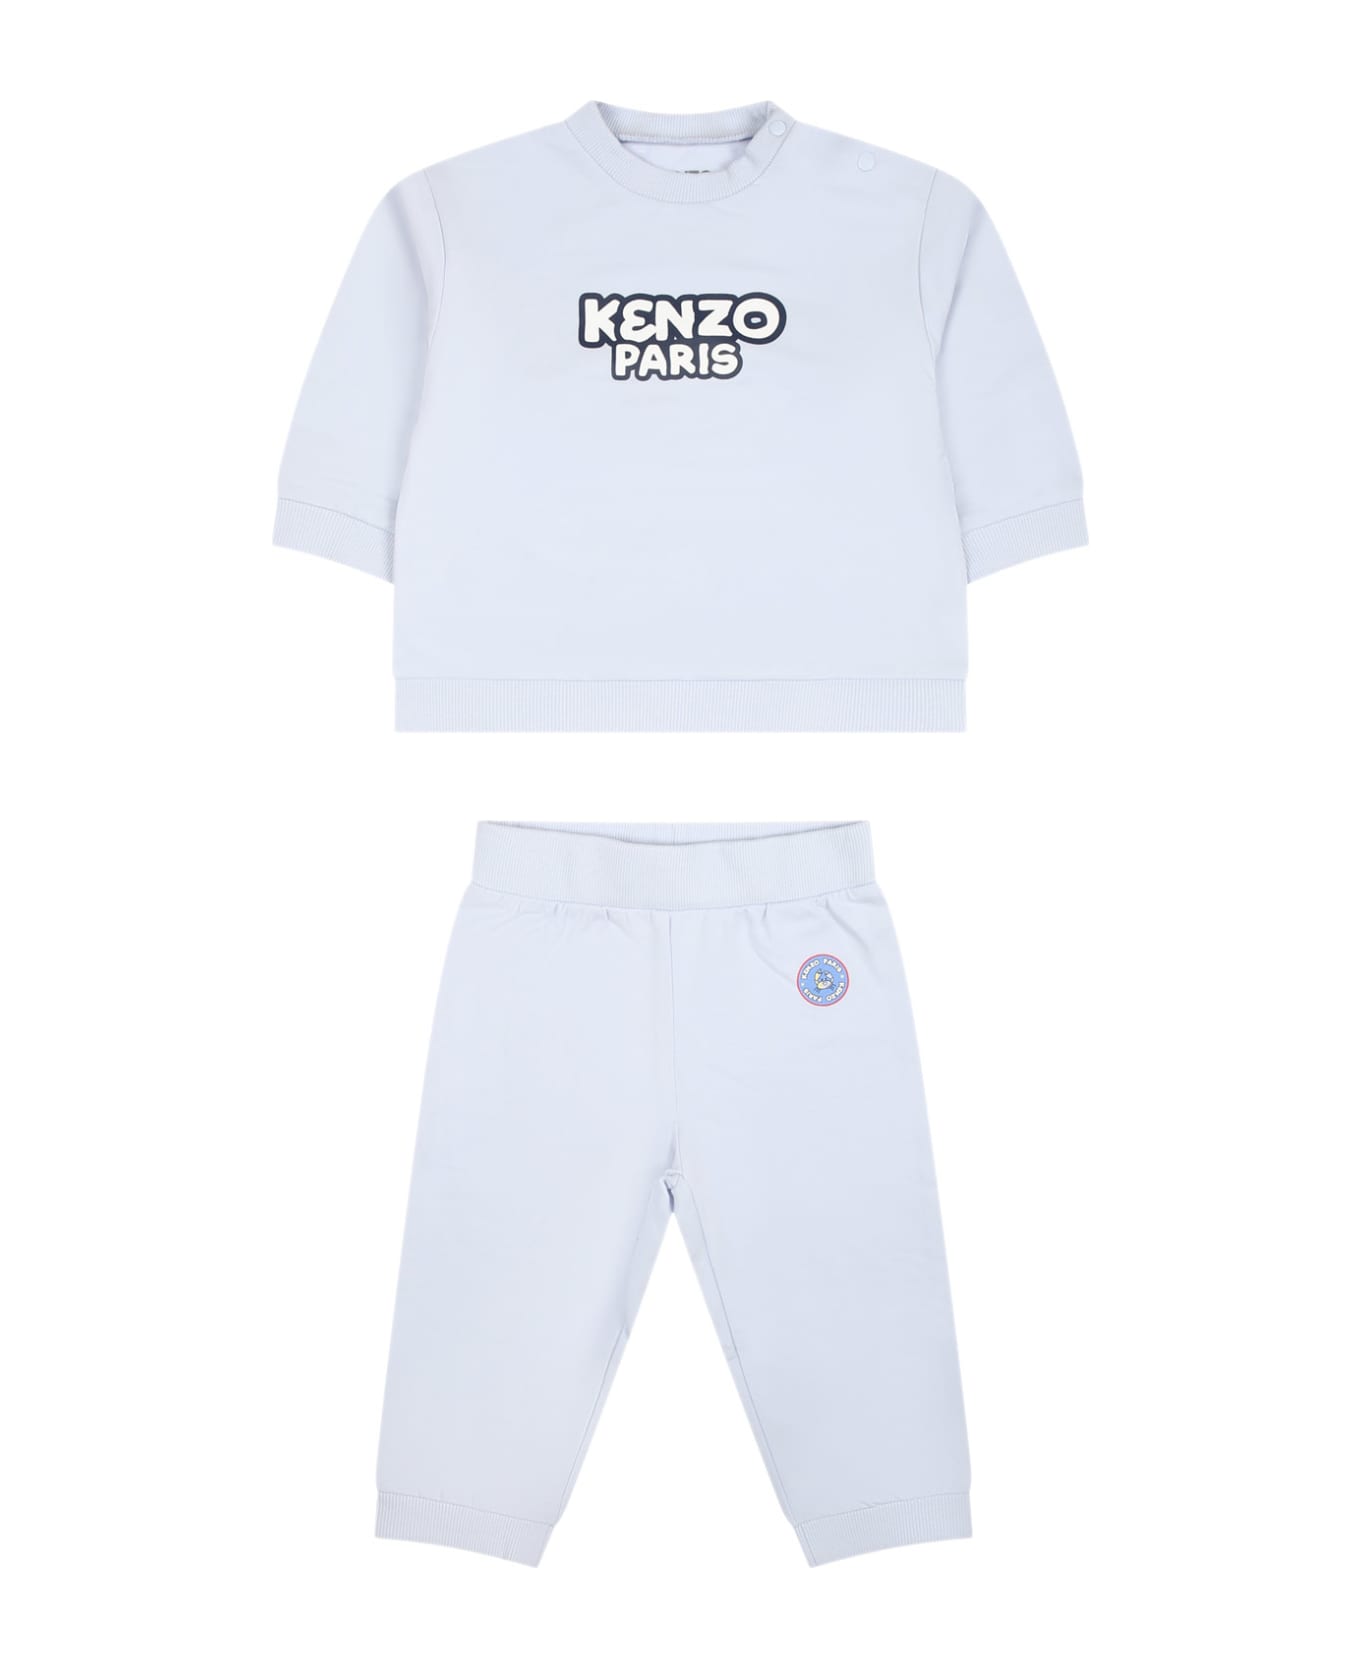 Kenzo Kids Sporty Suit For Newborn With Printing And Logo - Light Blue